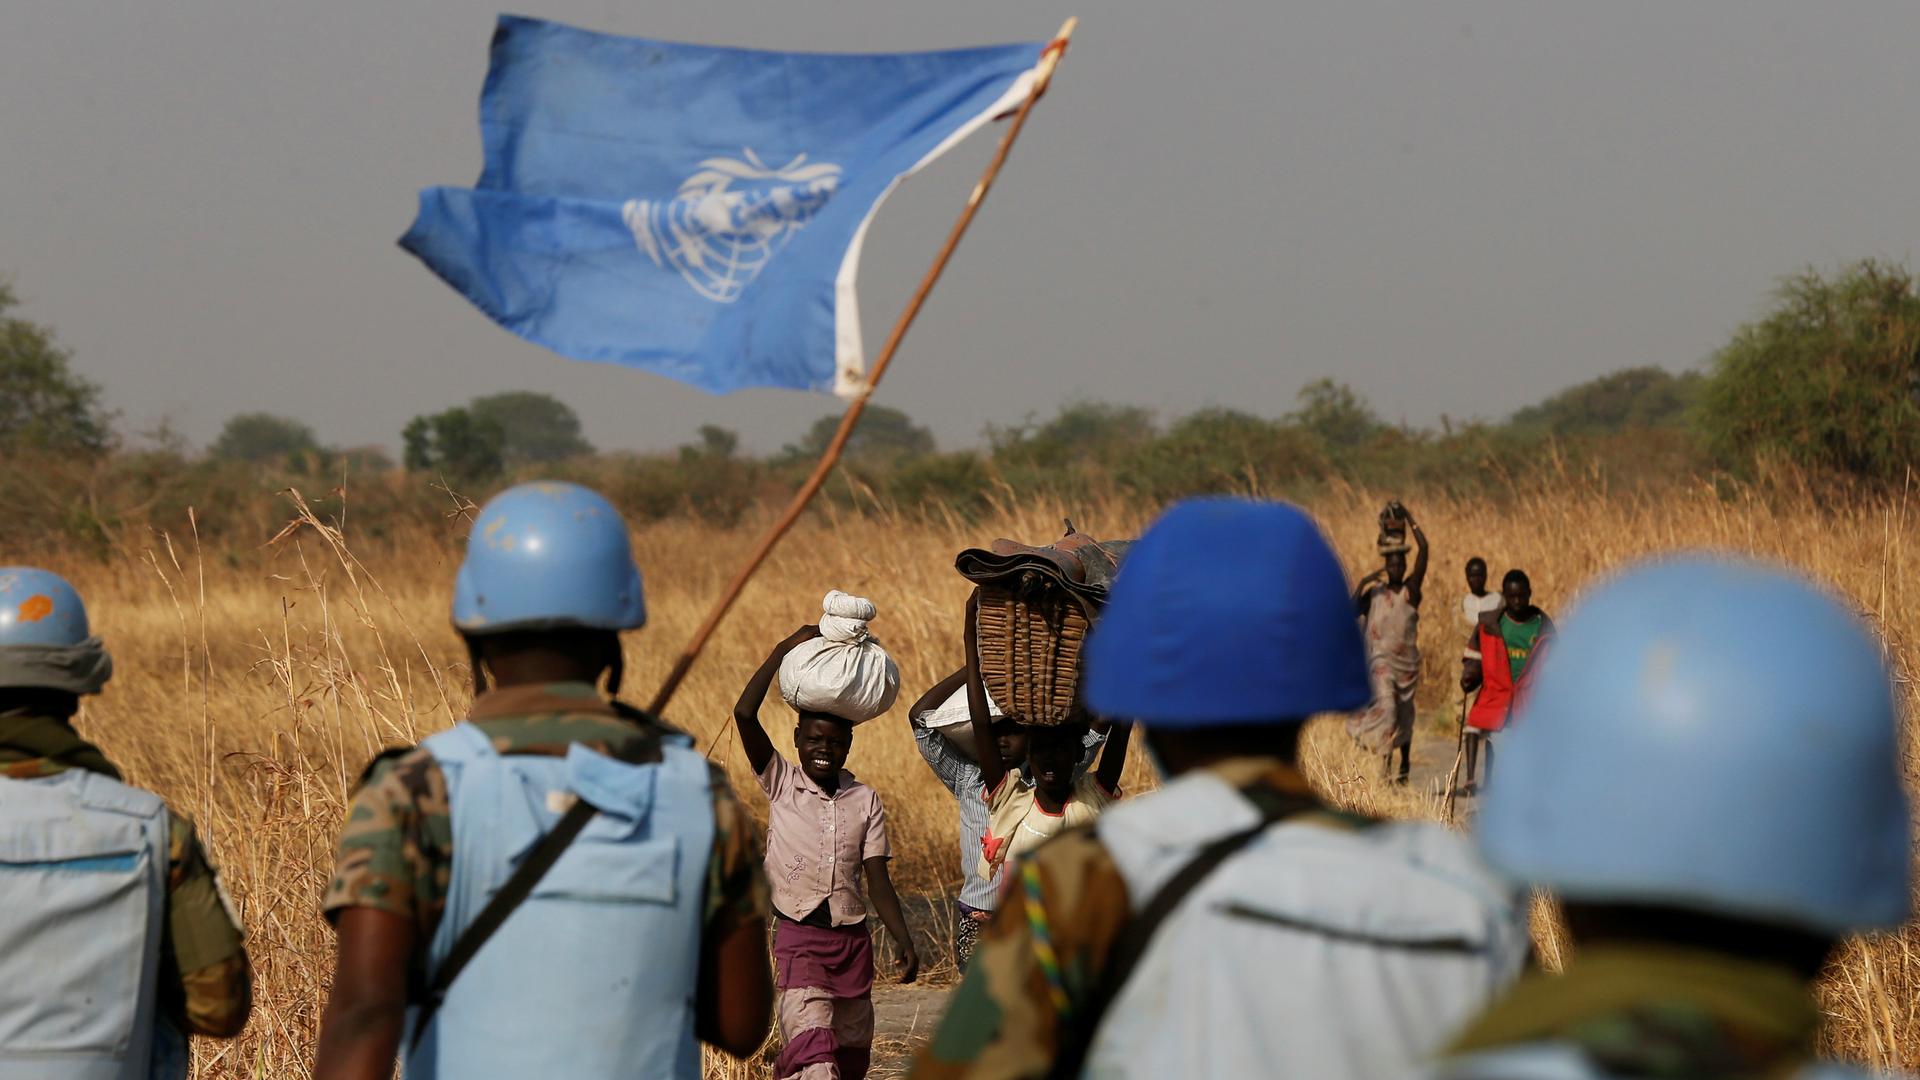 United Nations peacekeepers meet women and children on their path during a patrol near Bentiu, northern South Sudan, Feb. 11, 2017.